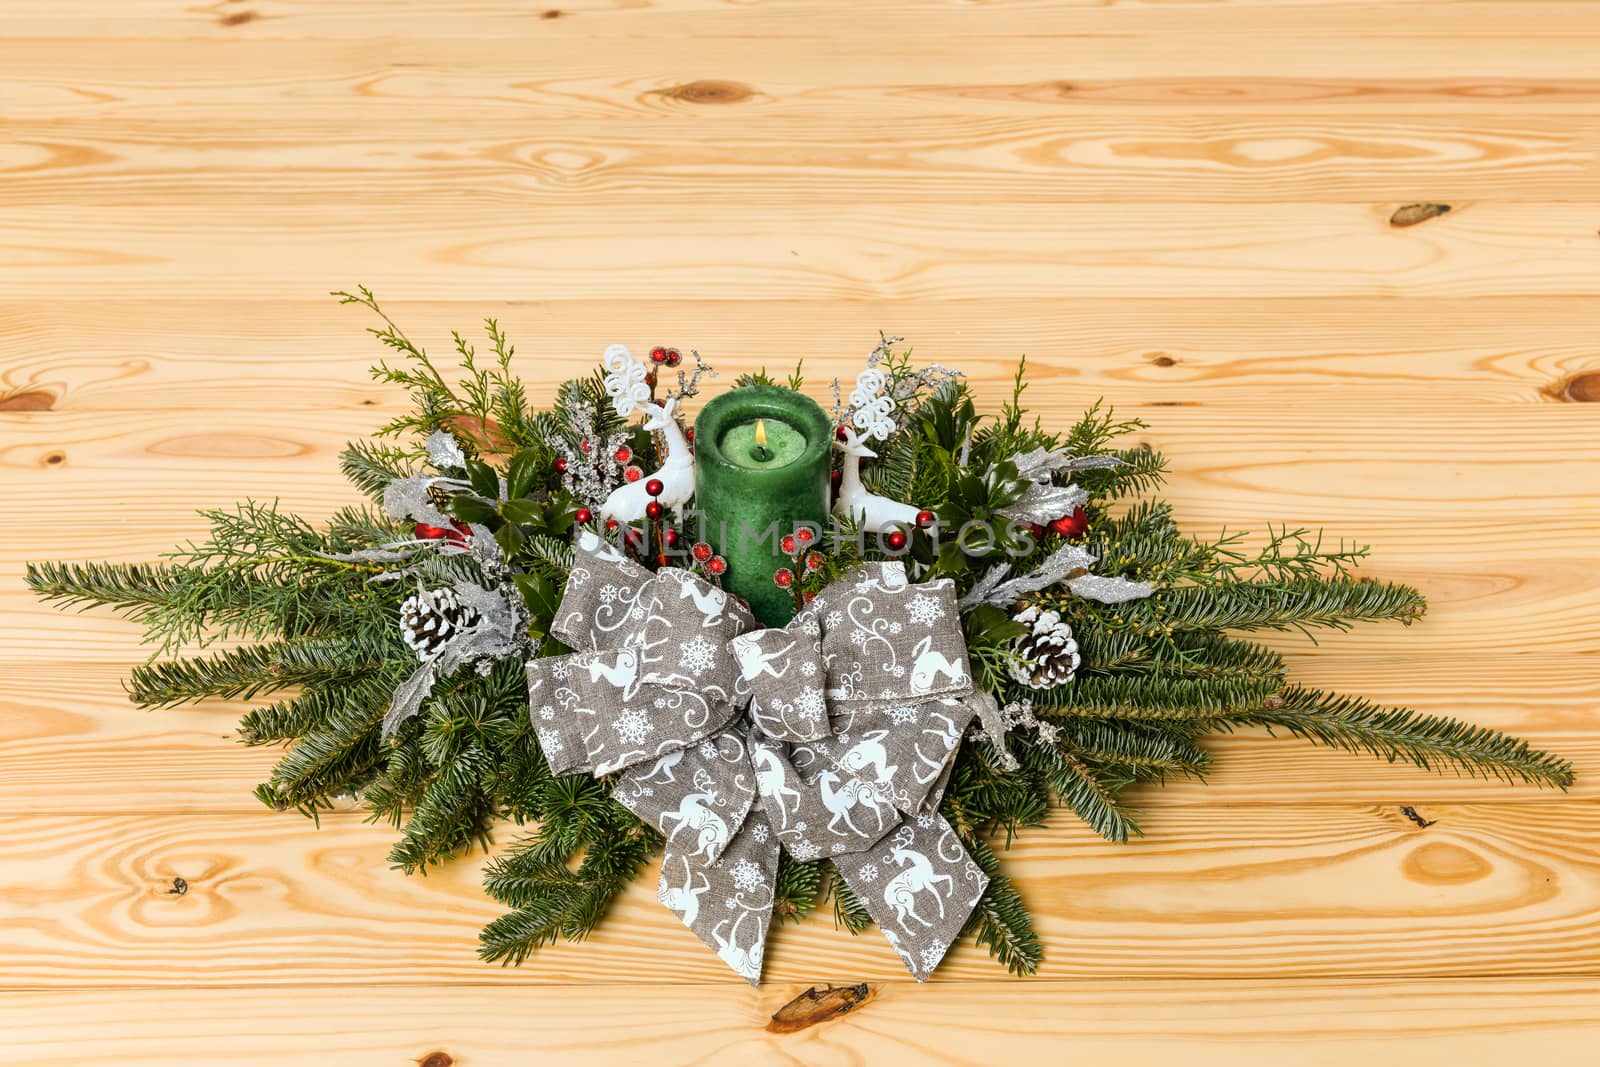 Christmas festive decoration with red baubles, holly with red berries , snow covered pine cones and winter greenery over woodpanel background.